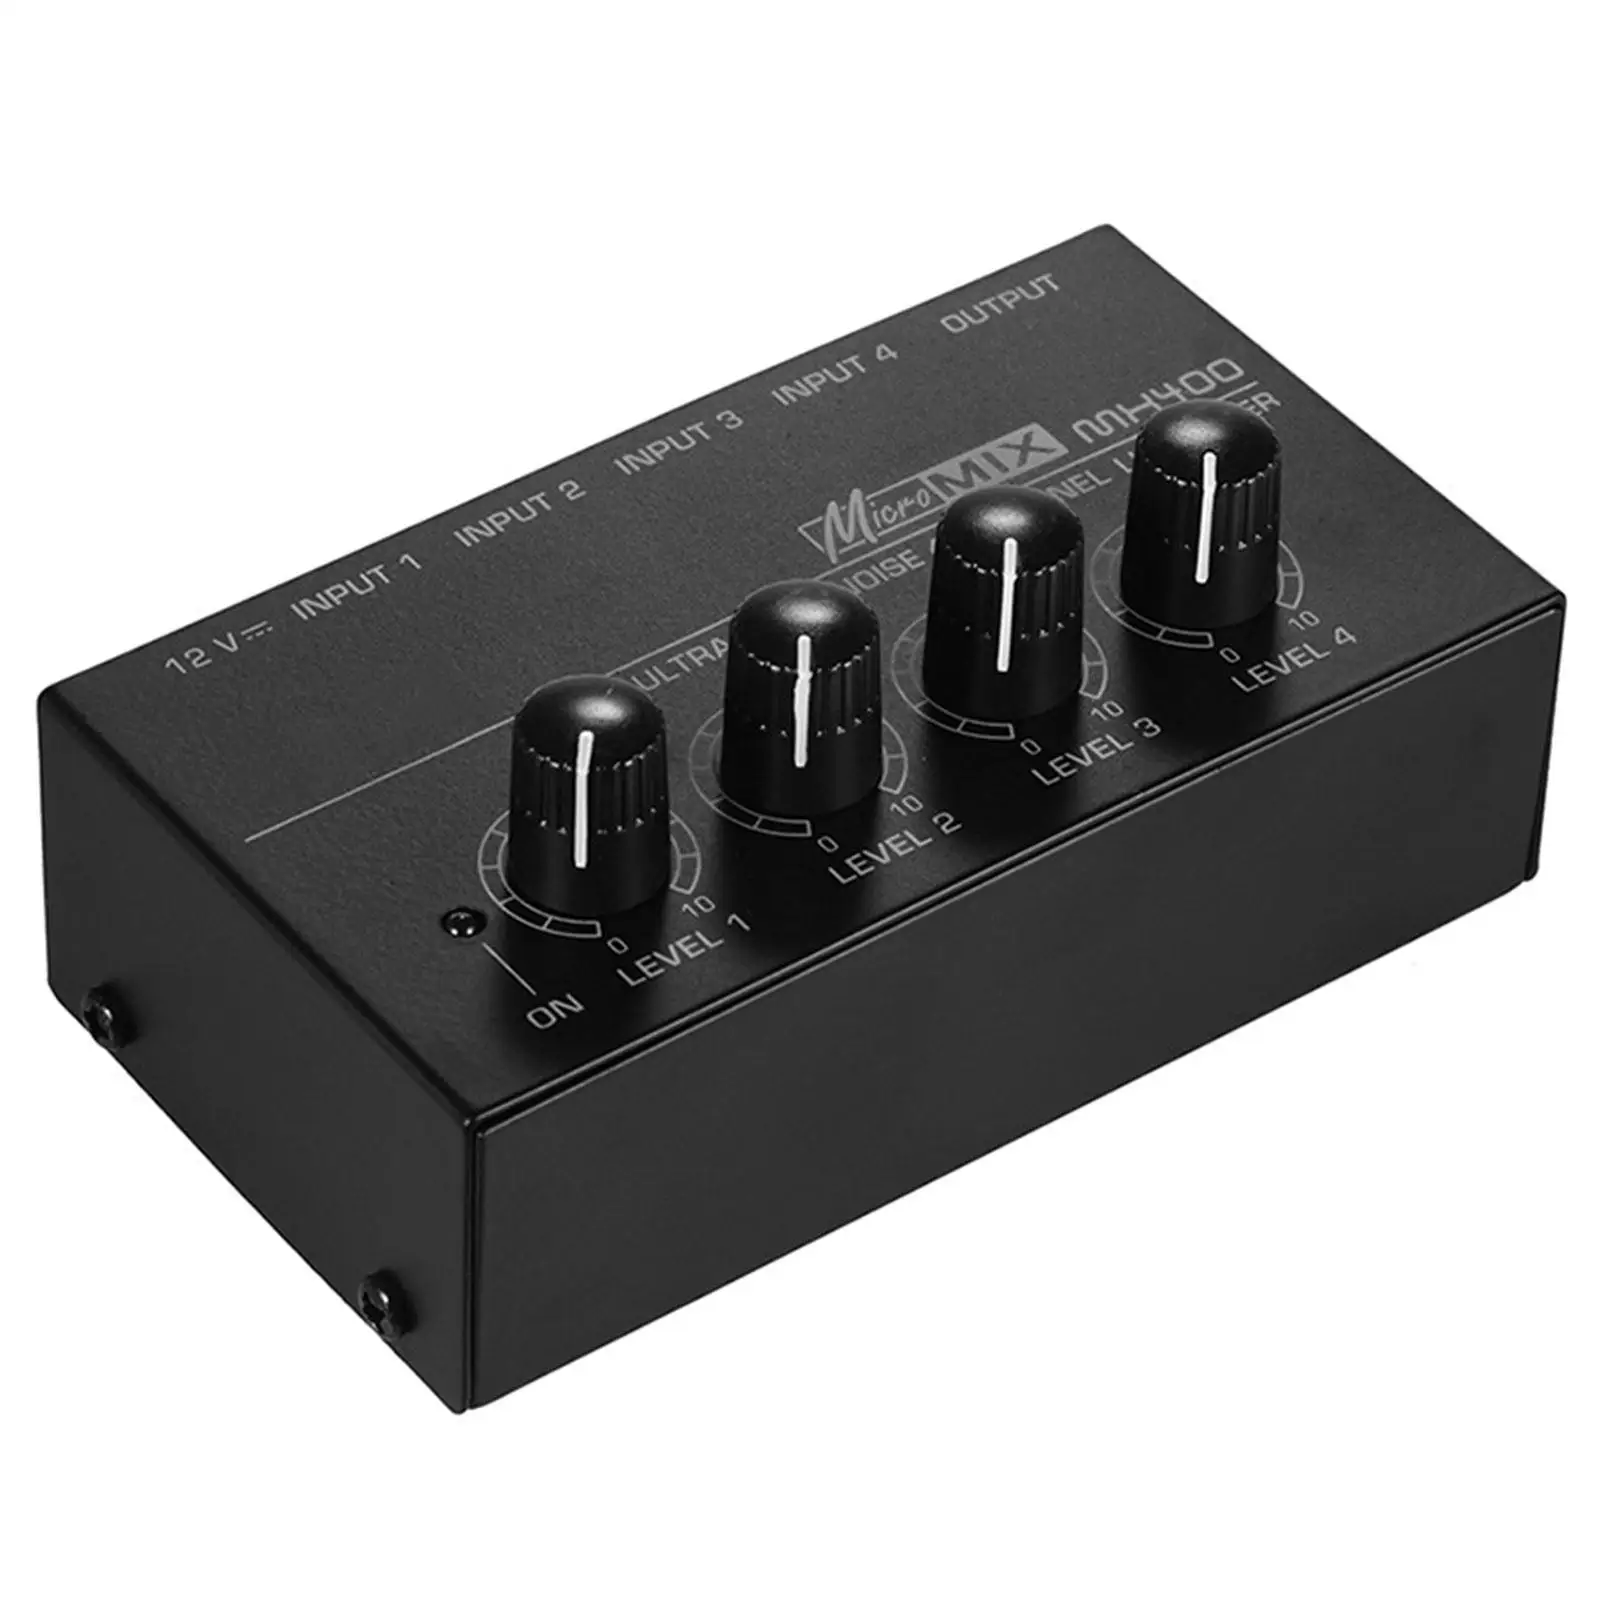 4 Channel Audio Mixer Equalizer Digital DJ Console Music Recording Equipment for Keyboards Karaoke Live Broadcasts Guitars Bars